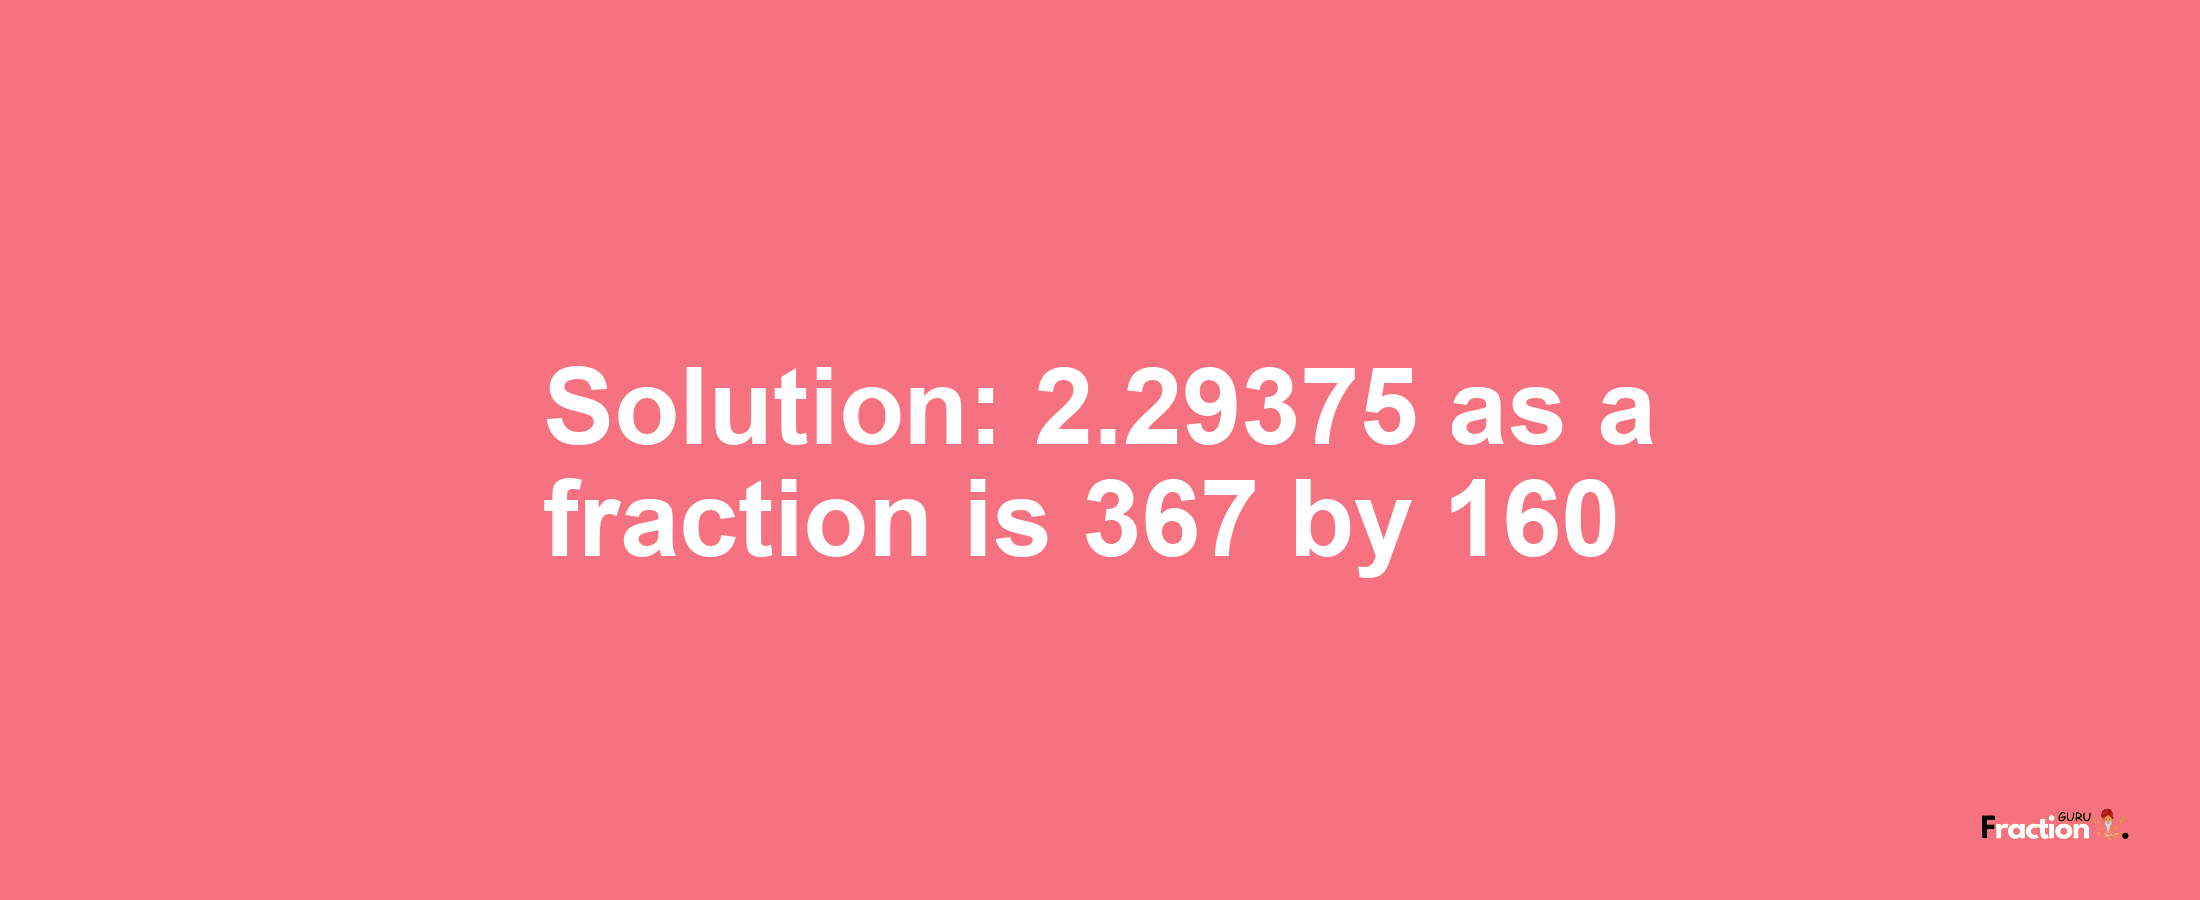 Solution:2.29375 as a fraction is 367/160